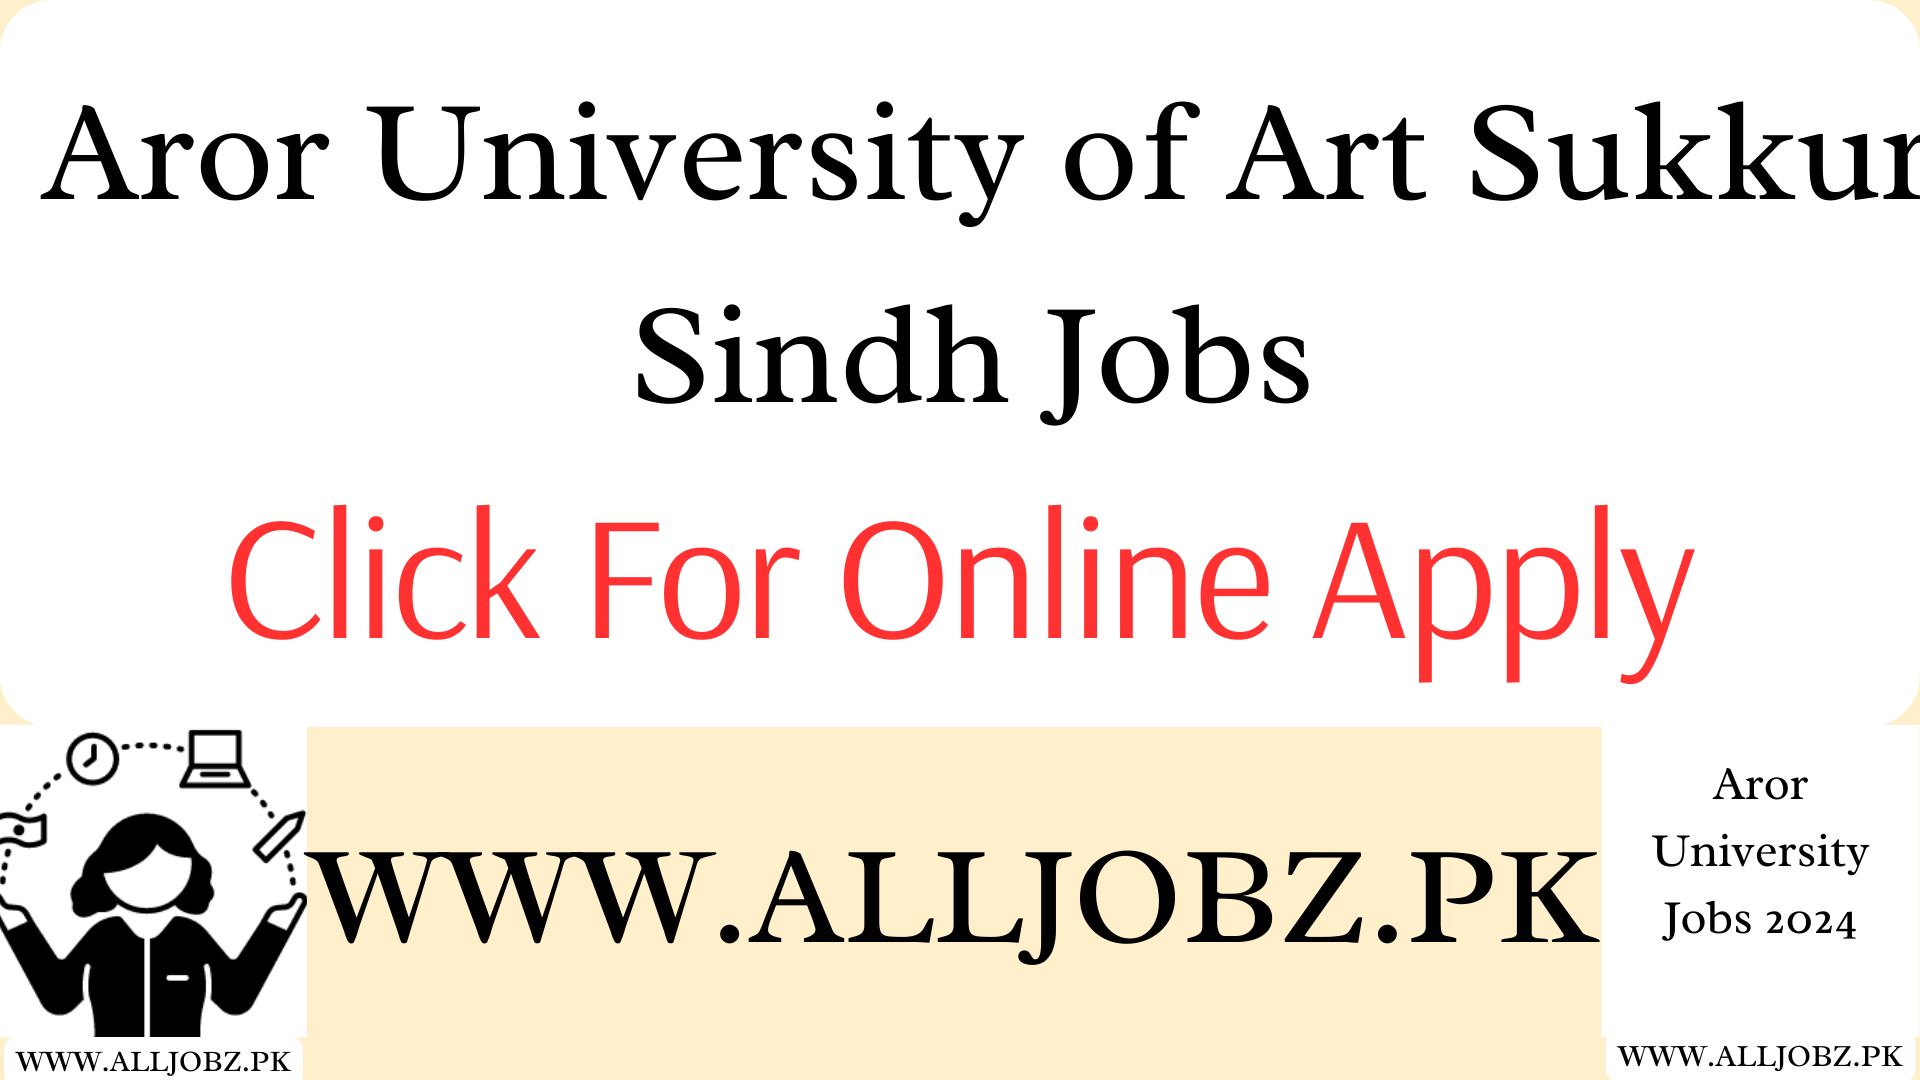 Free Career Opportunities At Aror University Of Art 2024, Career Opportunities At Aror University Of Art 2024 Sukkur, Career Opportunities At Aror University Of Art 2024 Pdf, Aror University Jobs 2024 Online Apply, Aror University Sukkur Jobs 2024 Advertisement, Aror University Careers, Aror University Faculty Jobs, Aror University Admission,